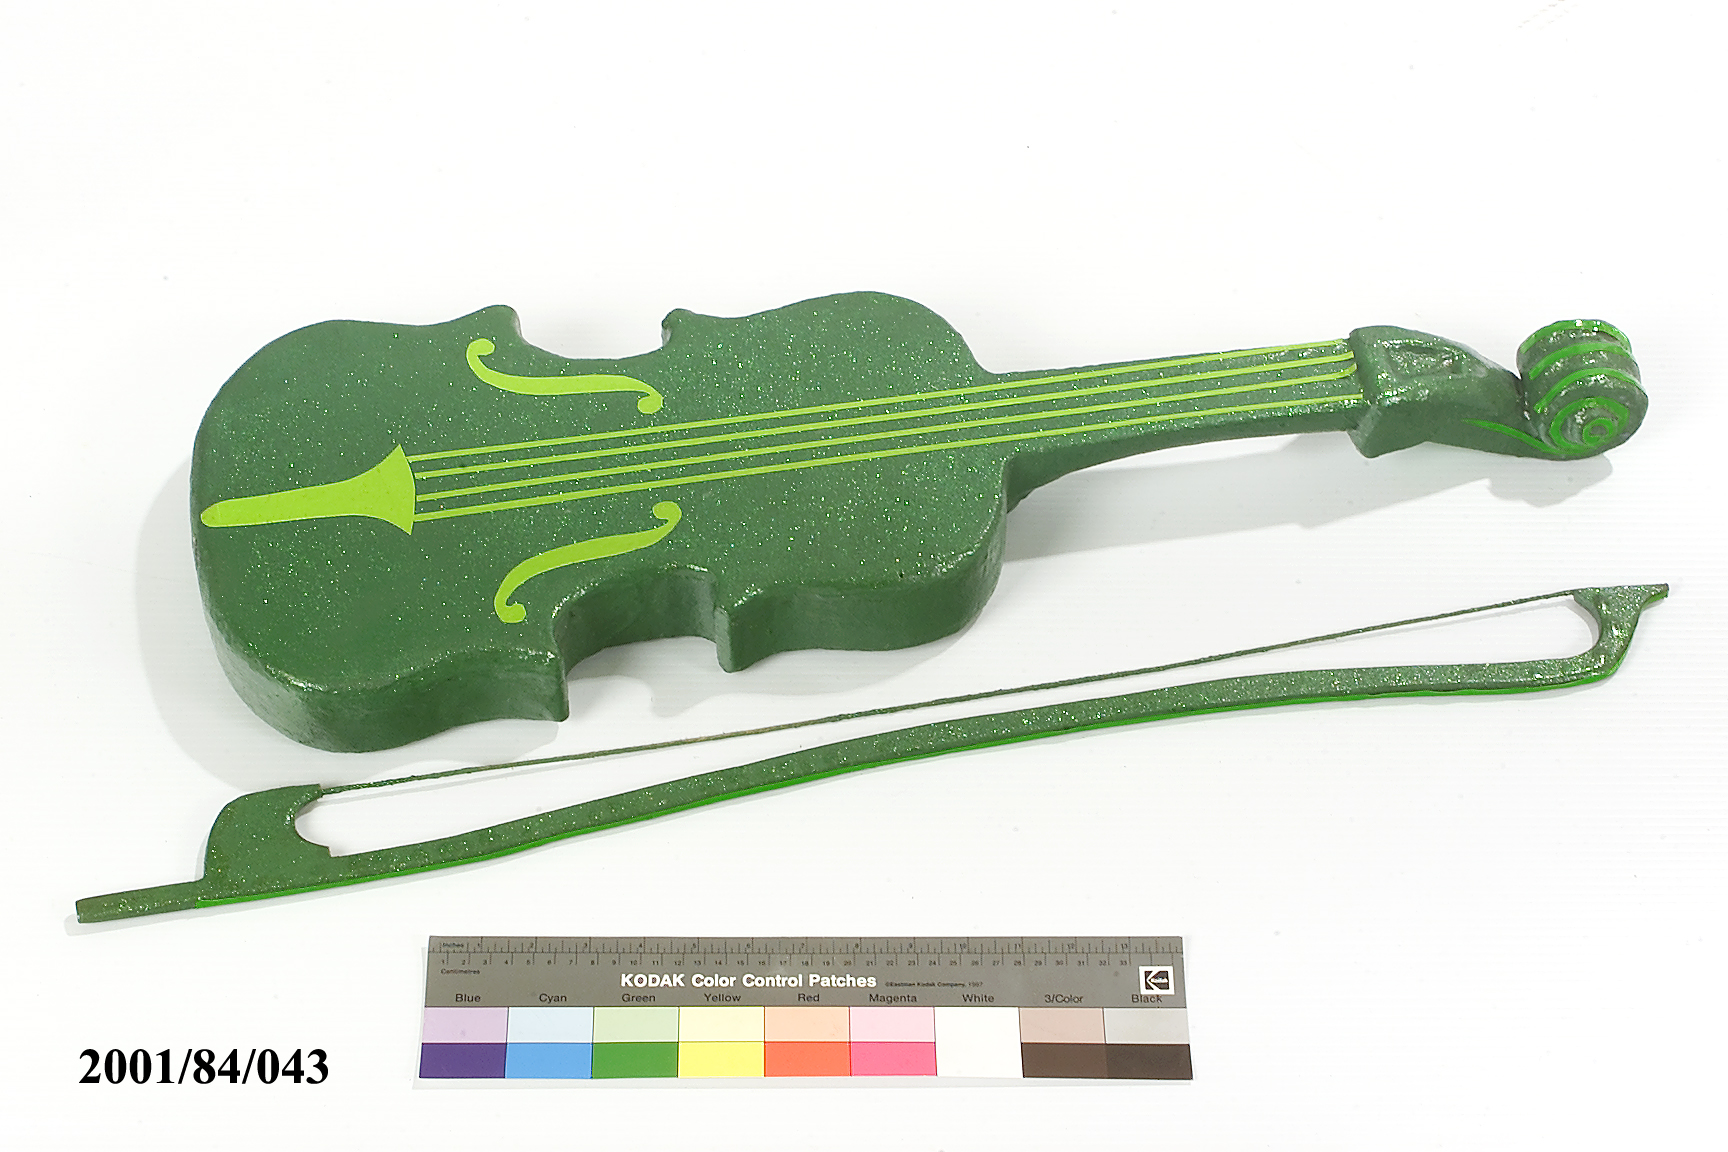 Violin and bow performance prop used in the Sydney Olympic Games Opening Ceremony